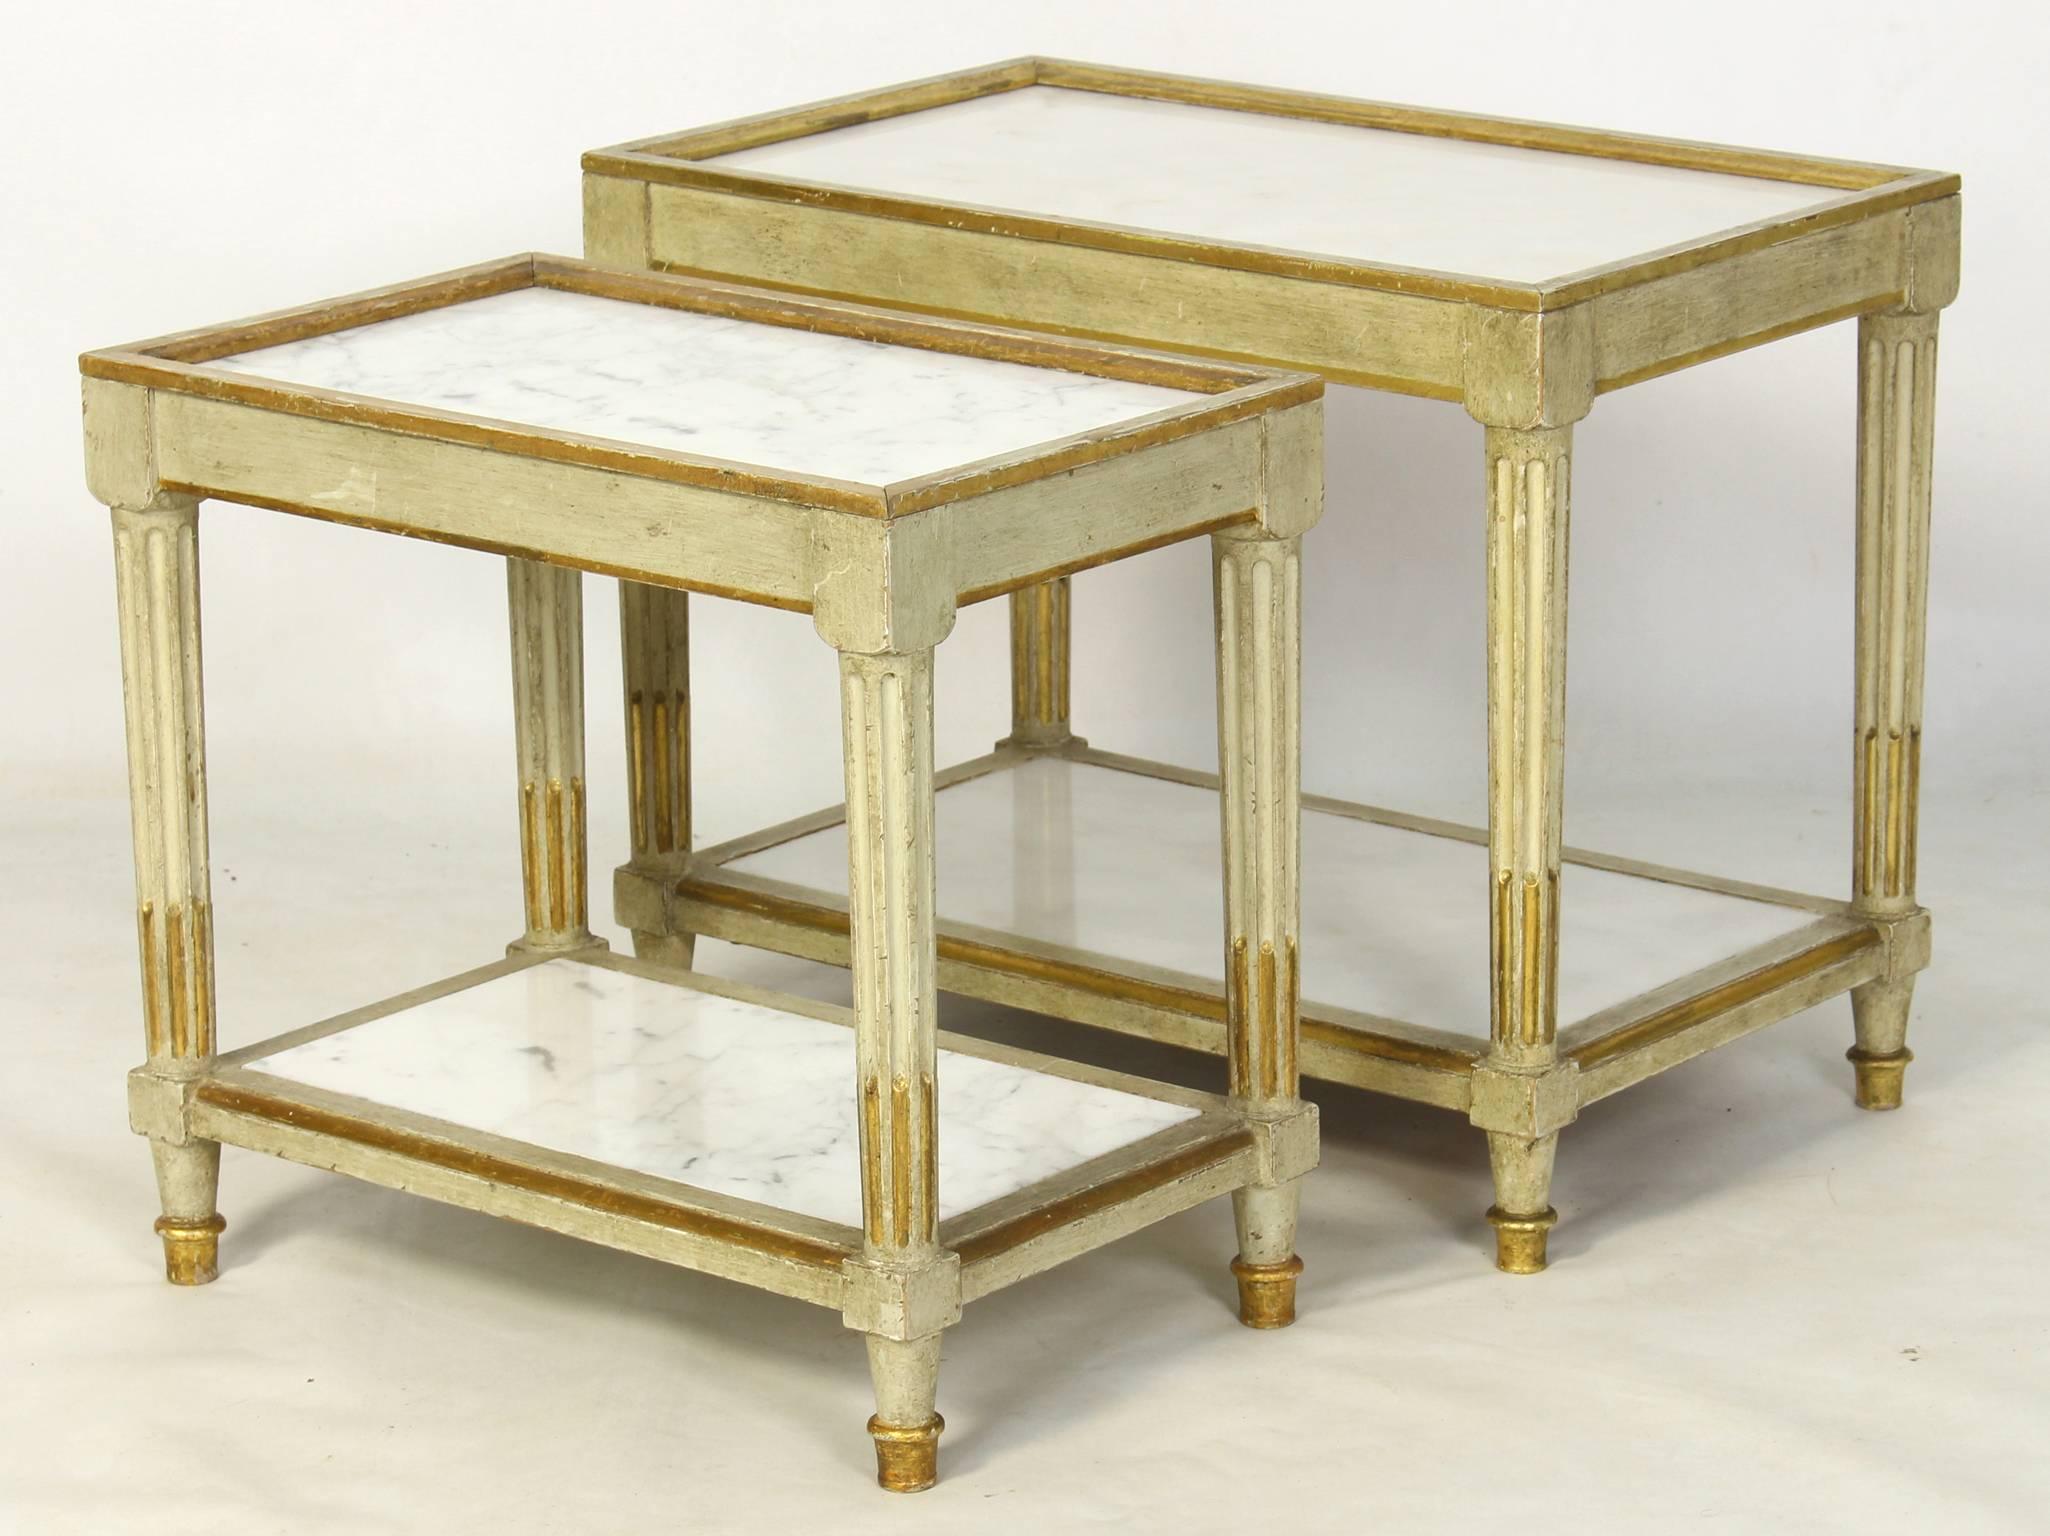 A pair of Italian neoclassical style, carved and painted marble topped side tables with gilt accents.